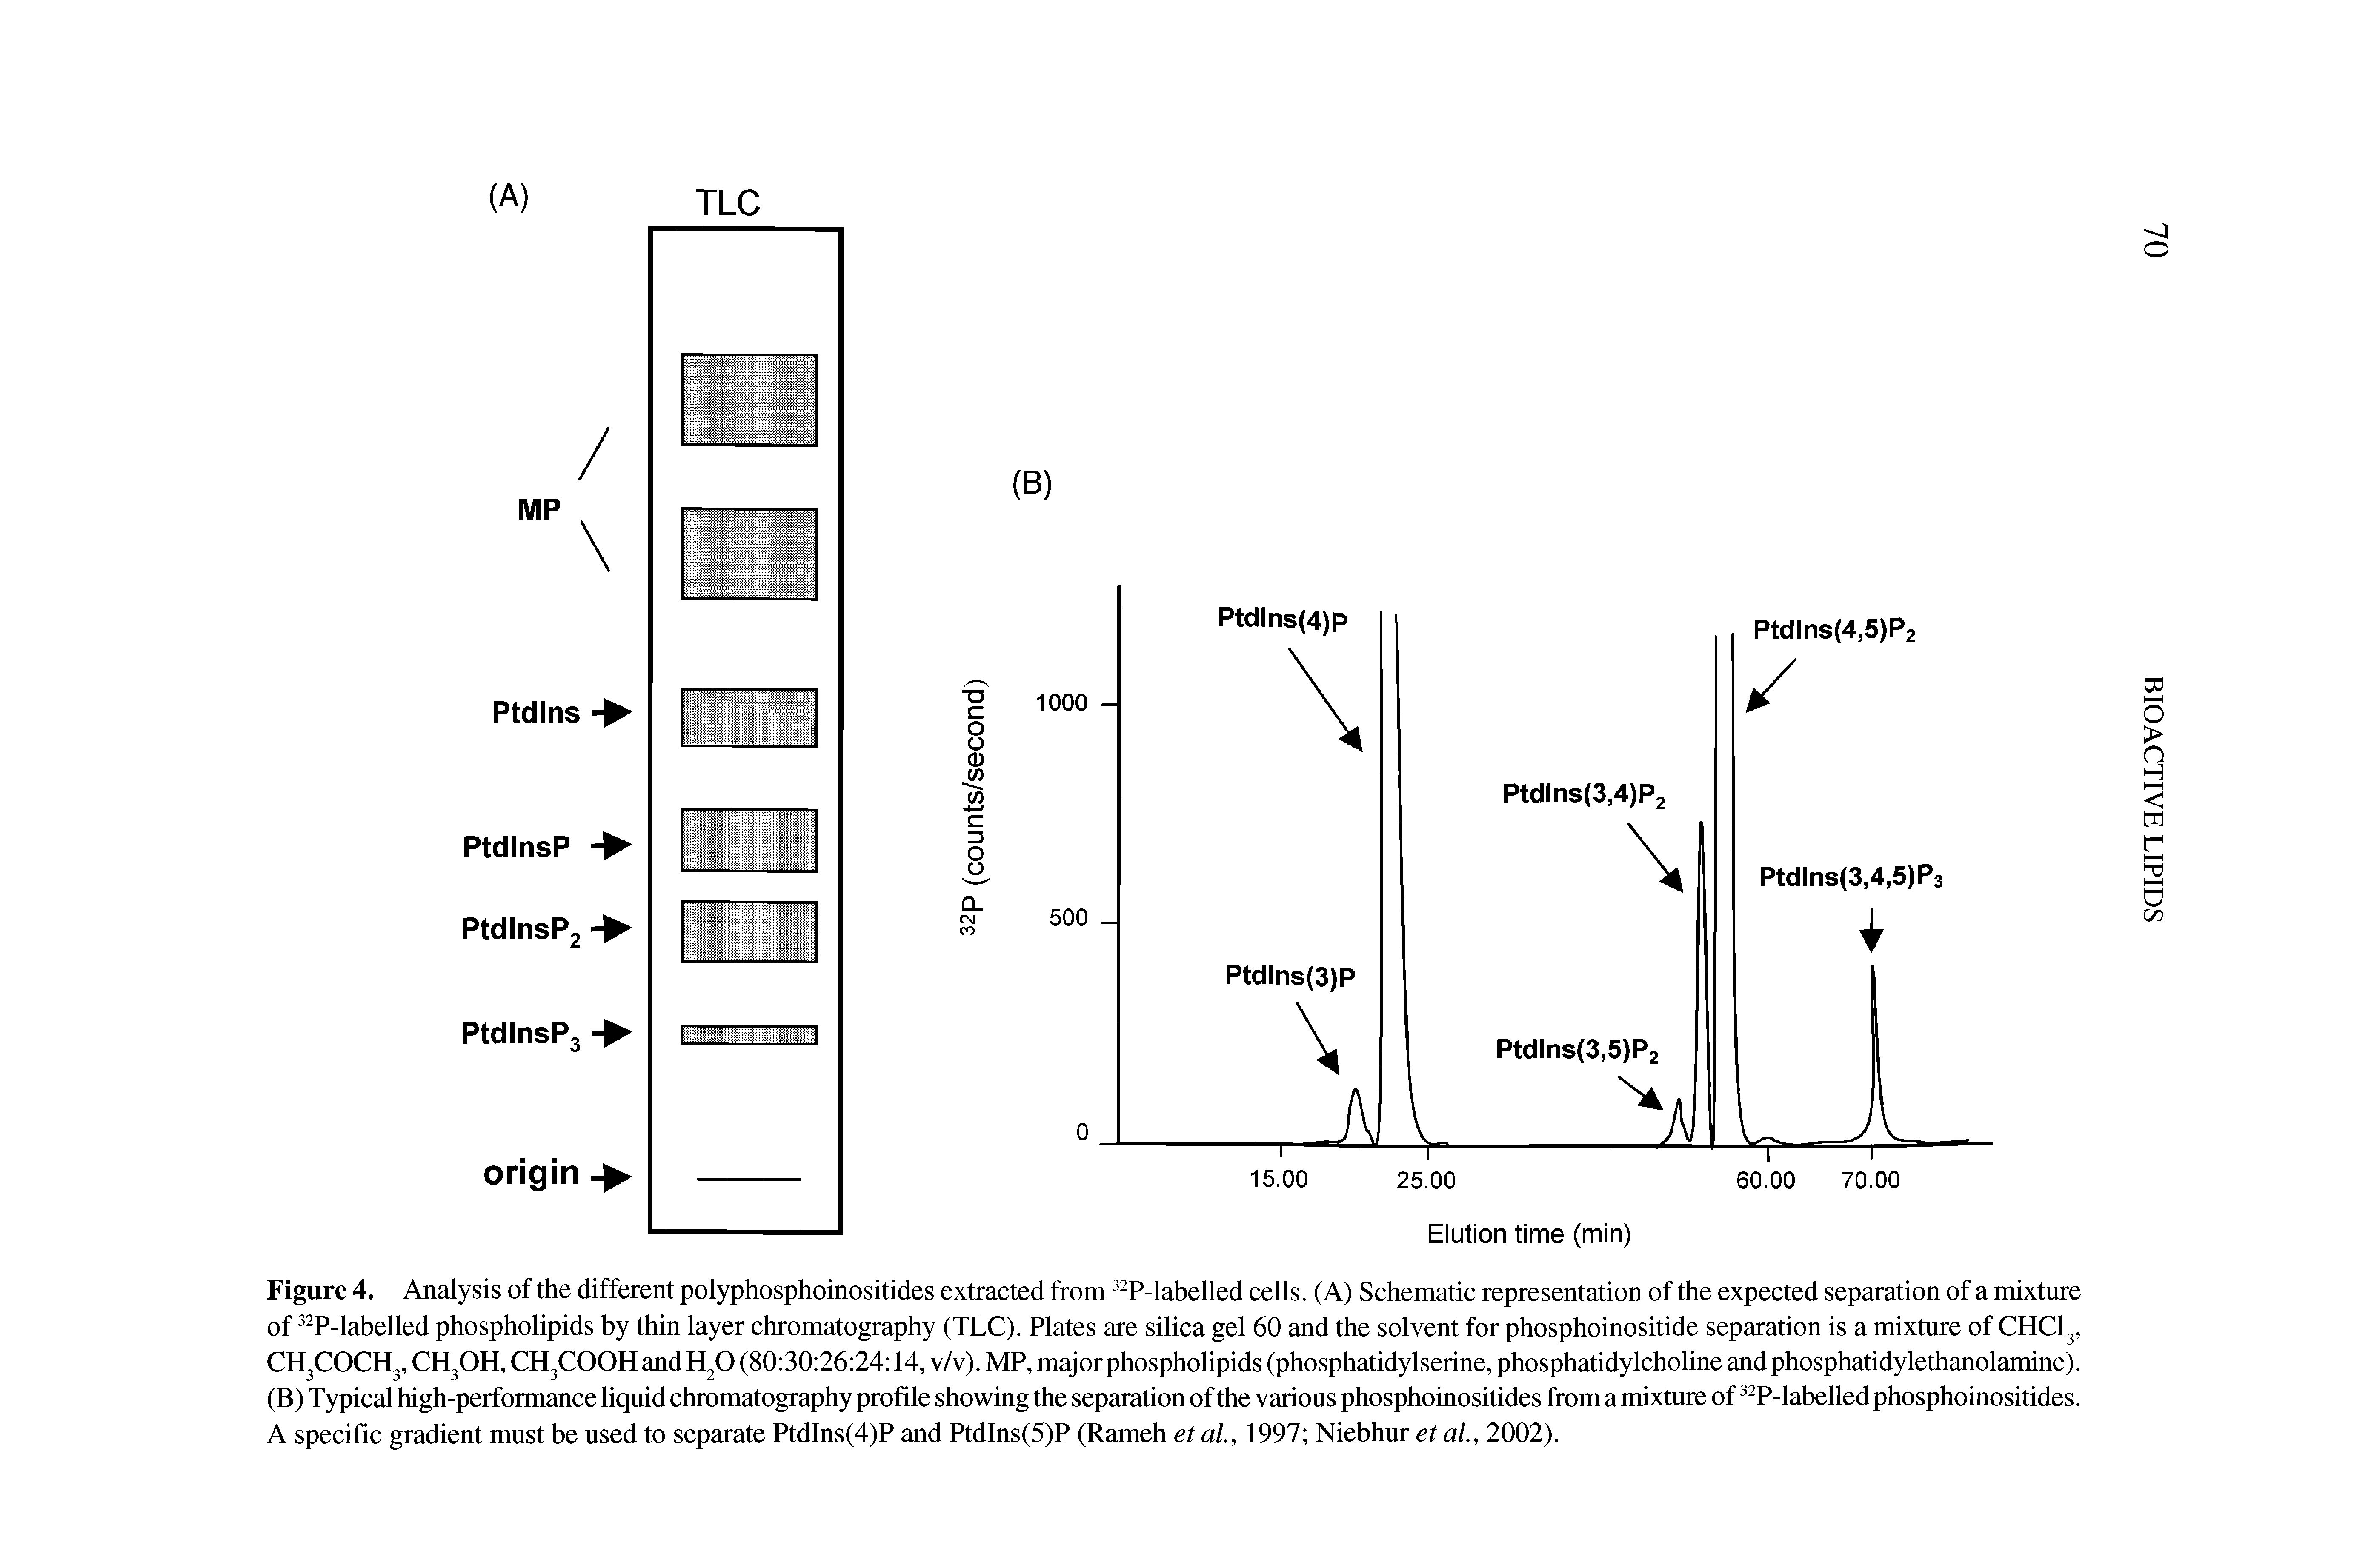 Figure 4. Analysis of the different polyphosphoinositides extracted from P-labelled cells. (A) Schematic representation of the expected separation of a mixture of P-labelled phospholipids by thin layer chromatography (TLC). Plates are silica gel 60 and the solvent for phosphoinositide separation is a mixture of CHCI3, CH3COCH3, CH3OH, CH3COOH and H O (80 30 26 24 14, v/v). MP, major phospholipids (phosphatidylserine, phosphatidylcholine and phosphatidylethanolamine). (B) Typical high-performance liquid chromatography profile showing the separation of the various phosphoinositides from a mixture of P-labelled phosphoinositides. A specific gradient must be used to separate PtdIns(4)P and PtdIns(5)P (Rameh et ai, 1997 Niebhur et al., 2002).